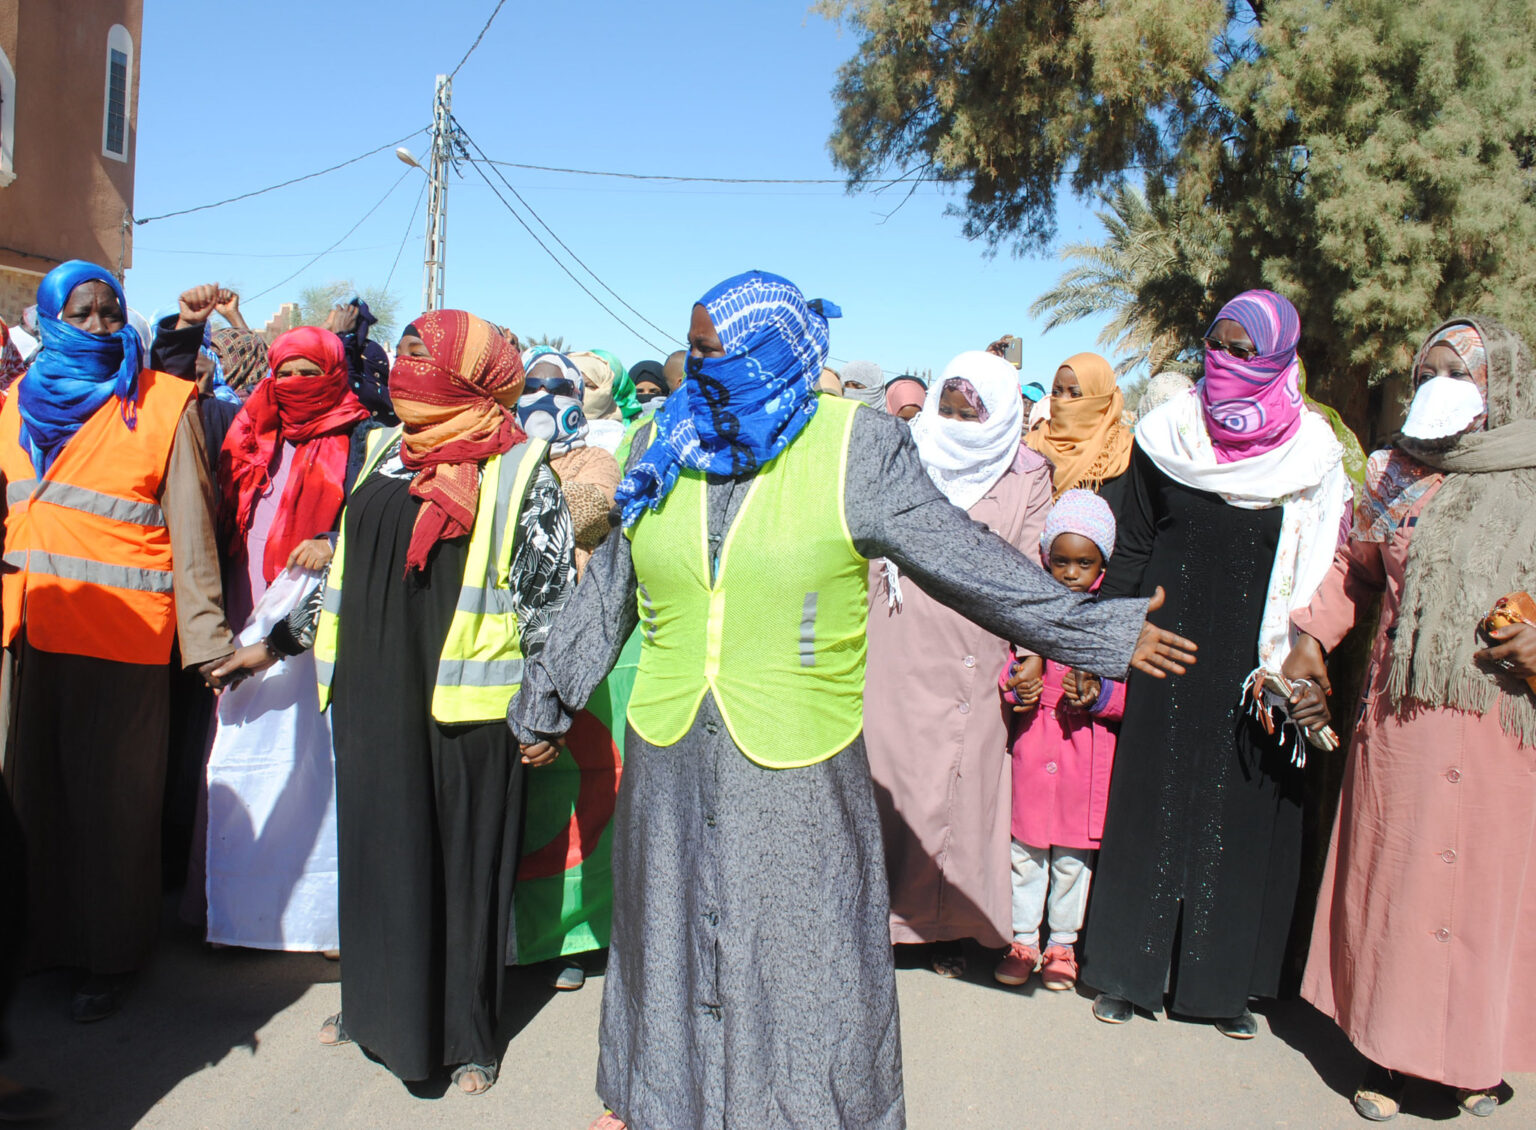 Women in colorful Muslim headscarves standing together on a street and holding hands